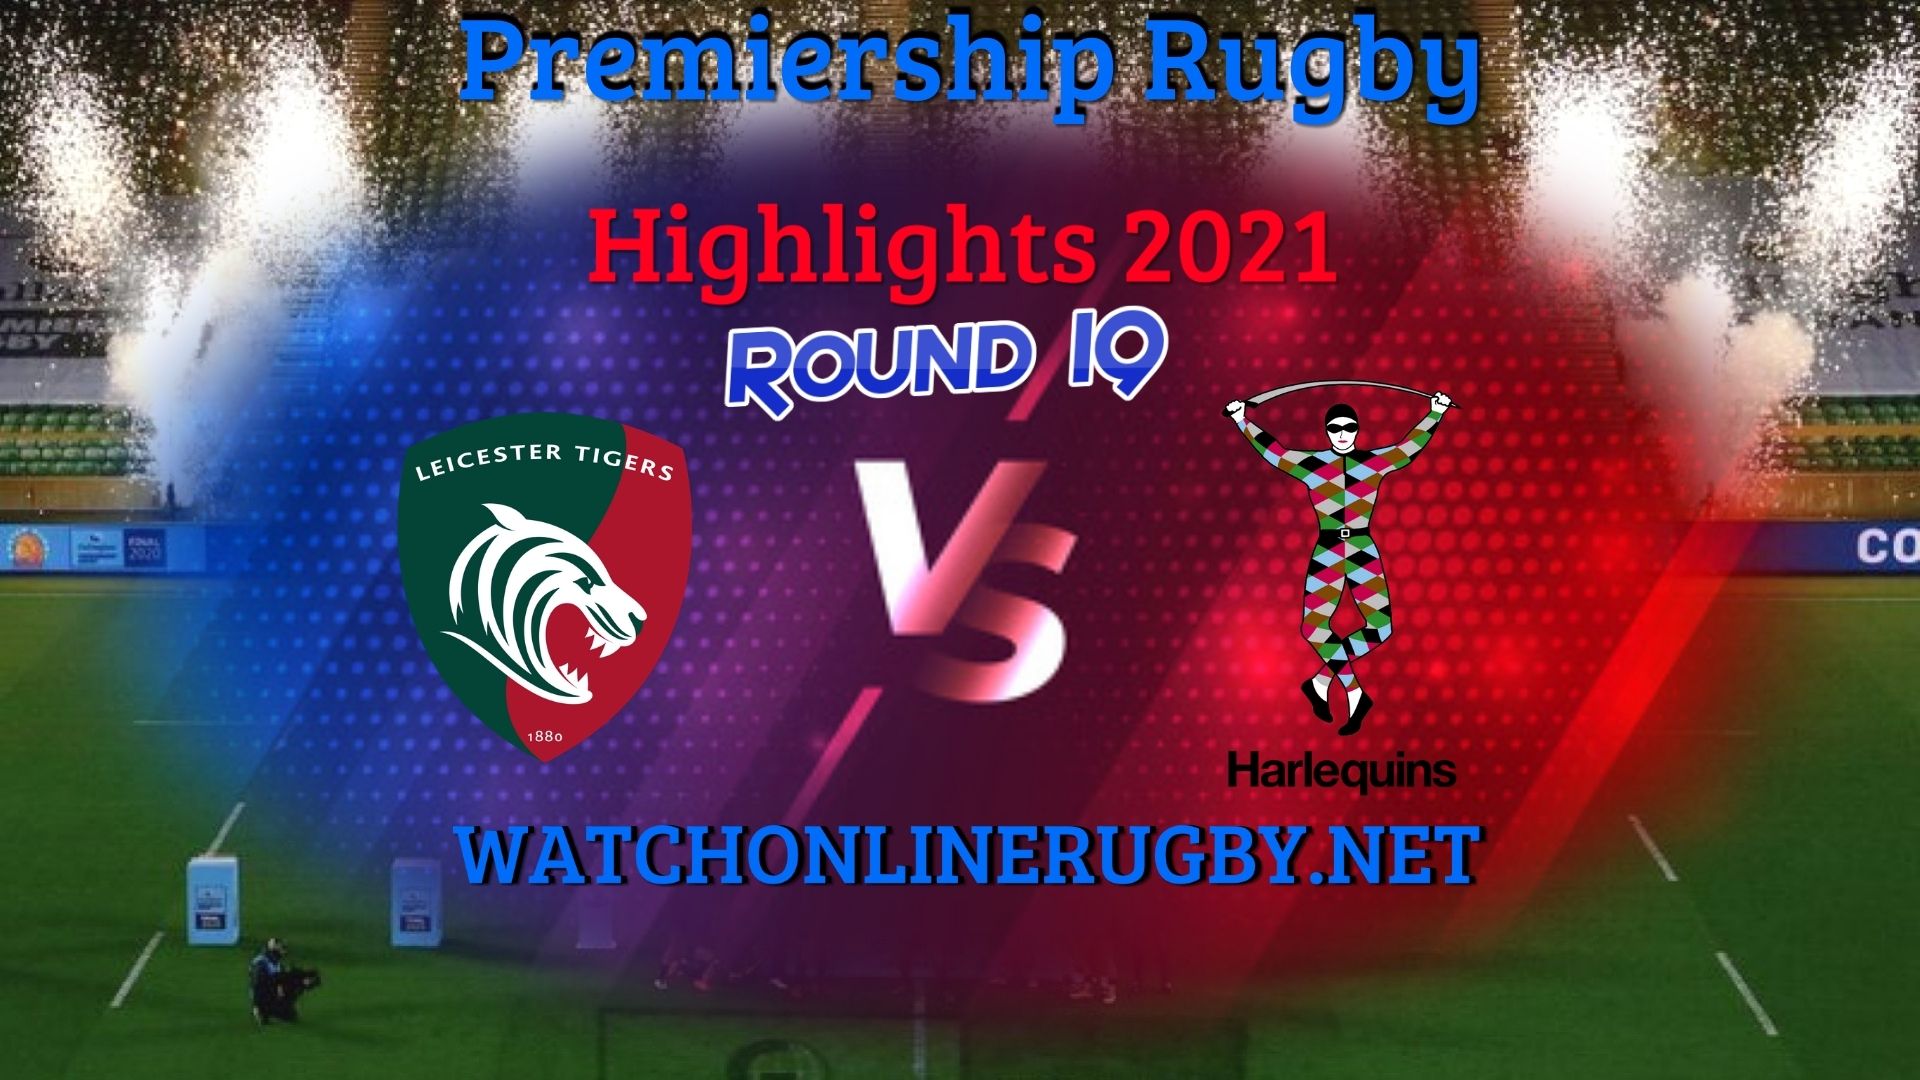 Leicester Tigers Vs Harlequins Premiership Rugby 2021 RD 19